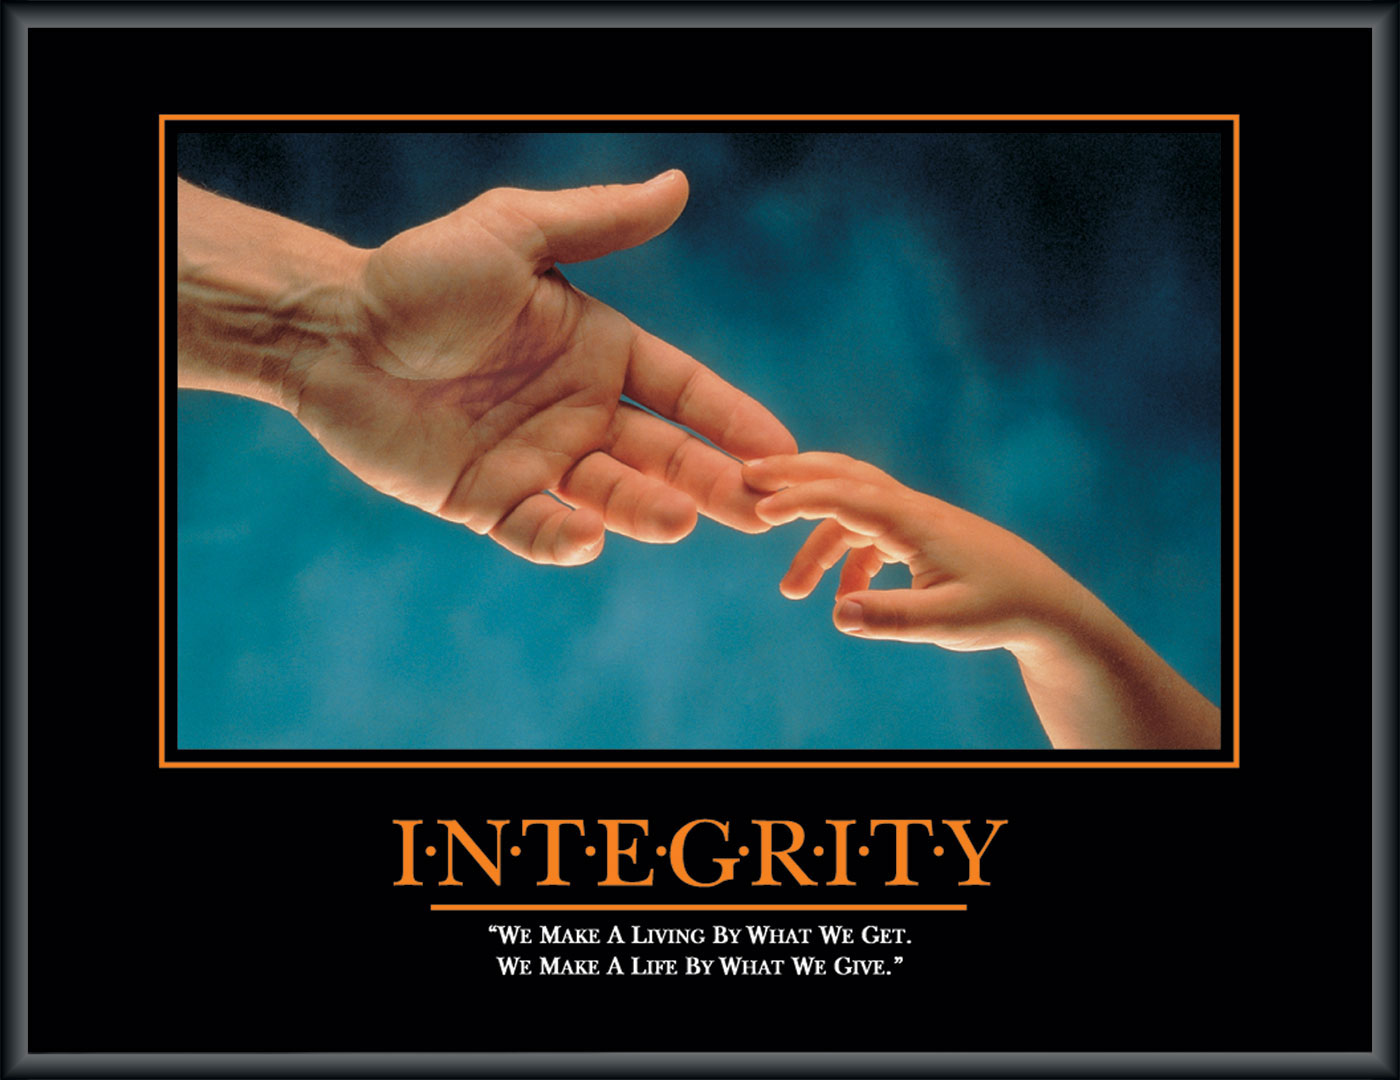 personal statement about integrity